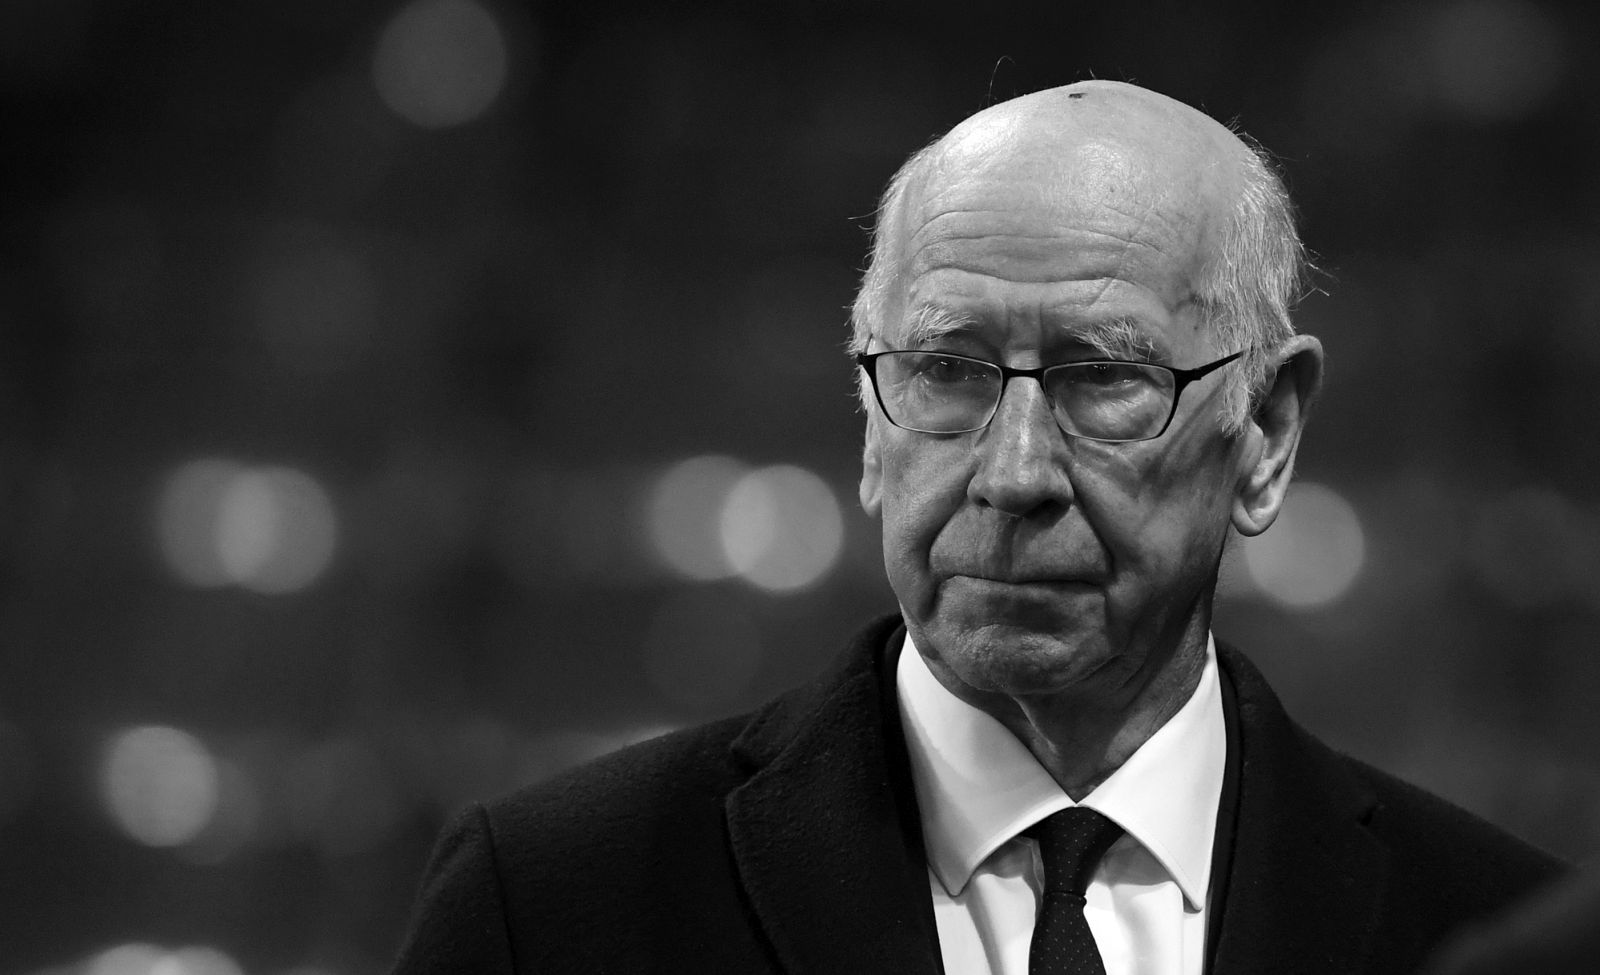 epa10930955 (FILE) - Former Manchester United and England soccer player Sir Bobby Charlton after the English FA Cup quarter-final match between Chelsea FC and Manchester United at Stamford Bridge, London, Britain, 13 March 2017 (Reissued 21 October 2023). English soccer legend Sir Bobby Charlton died at the age of 86 on 21 October 2023.  EPA/WILL OLIVER EDITORIAL USE ONLY. No use with unauthorized audio, video, data, fixture lists, club/league logos or 'live' services. Online in-match use limited to 75 images, no video emulation. No use in betting, games or single club/league/player publications. *** Local Caption *** 53386165